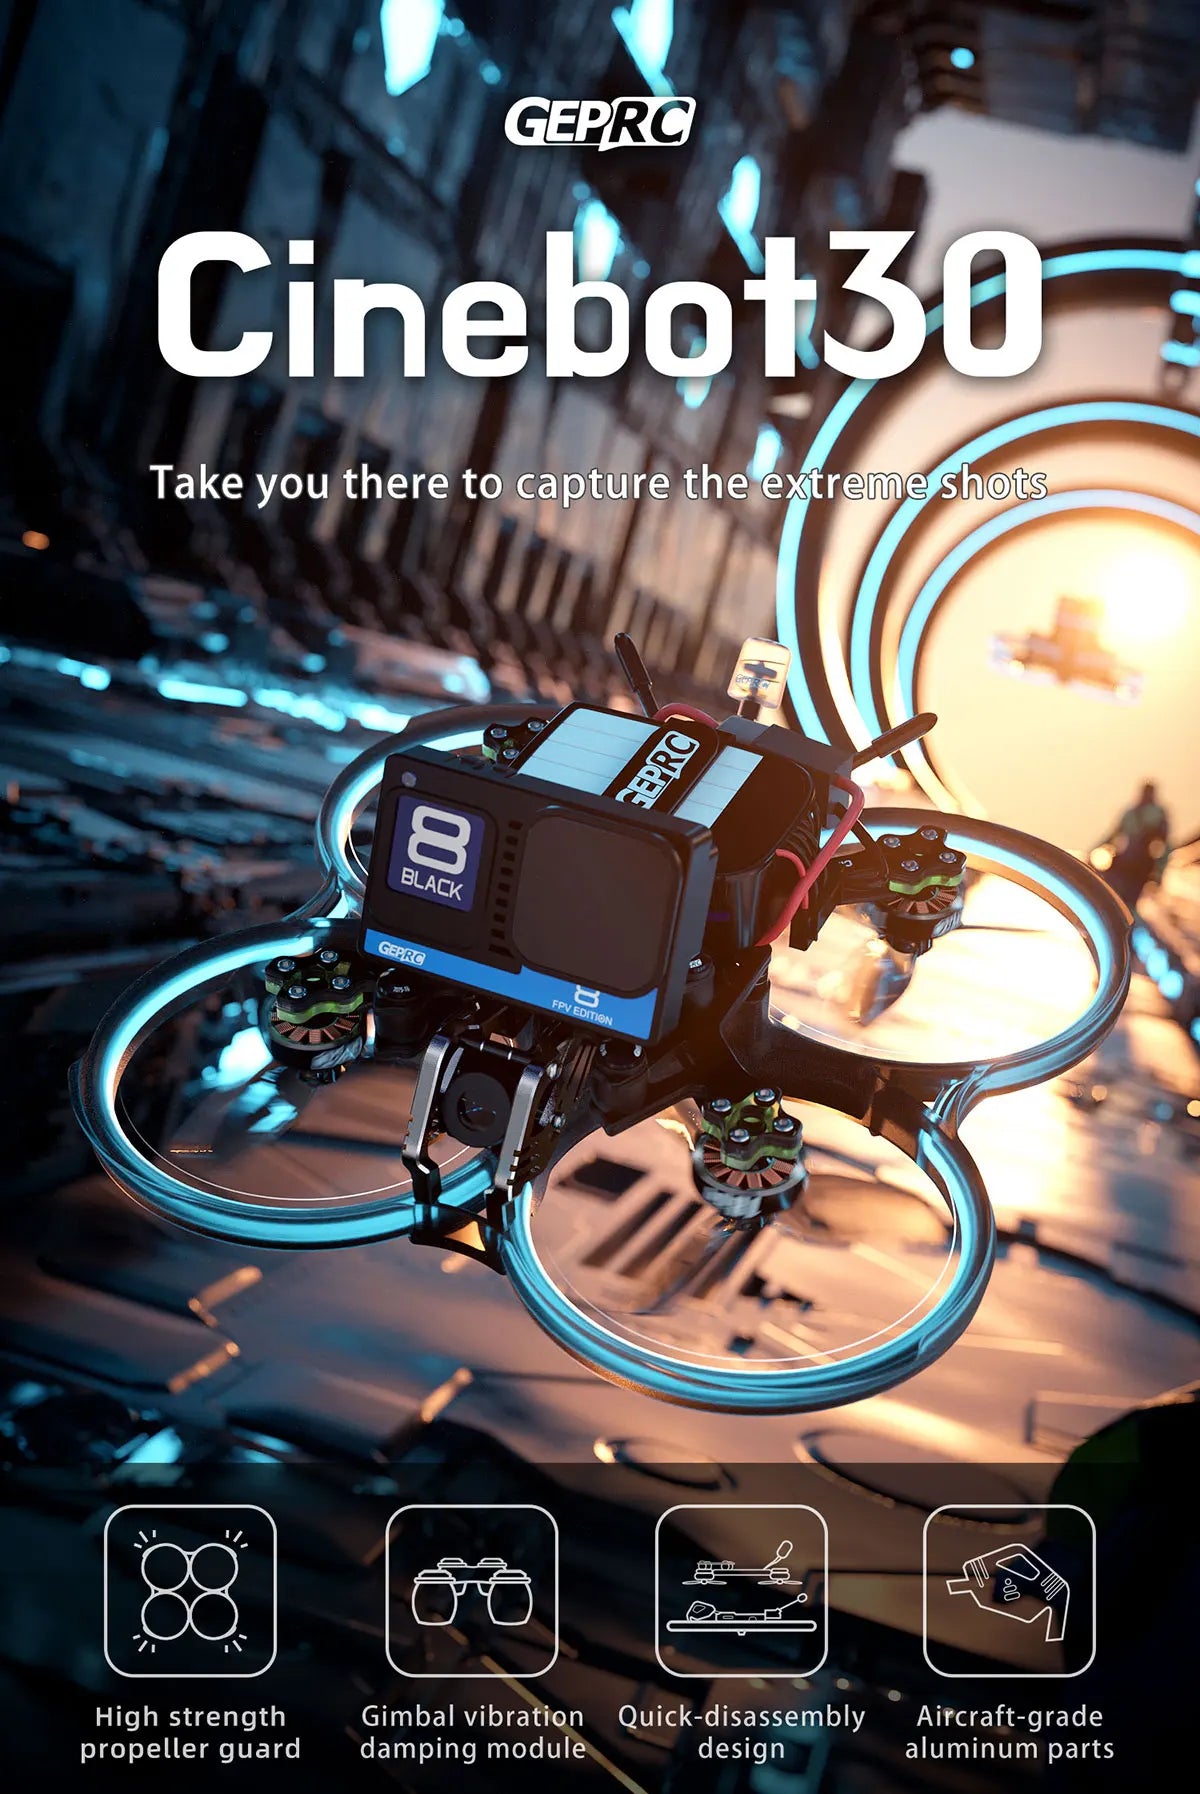 GEPRC NEW Cinebot30  FPV Drone, GEPRC Cinebot3o Take you there to capture the exitreme shots 8 